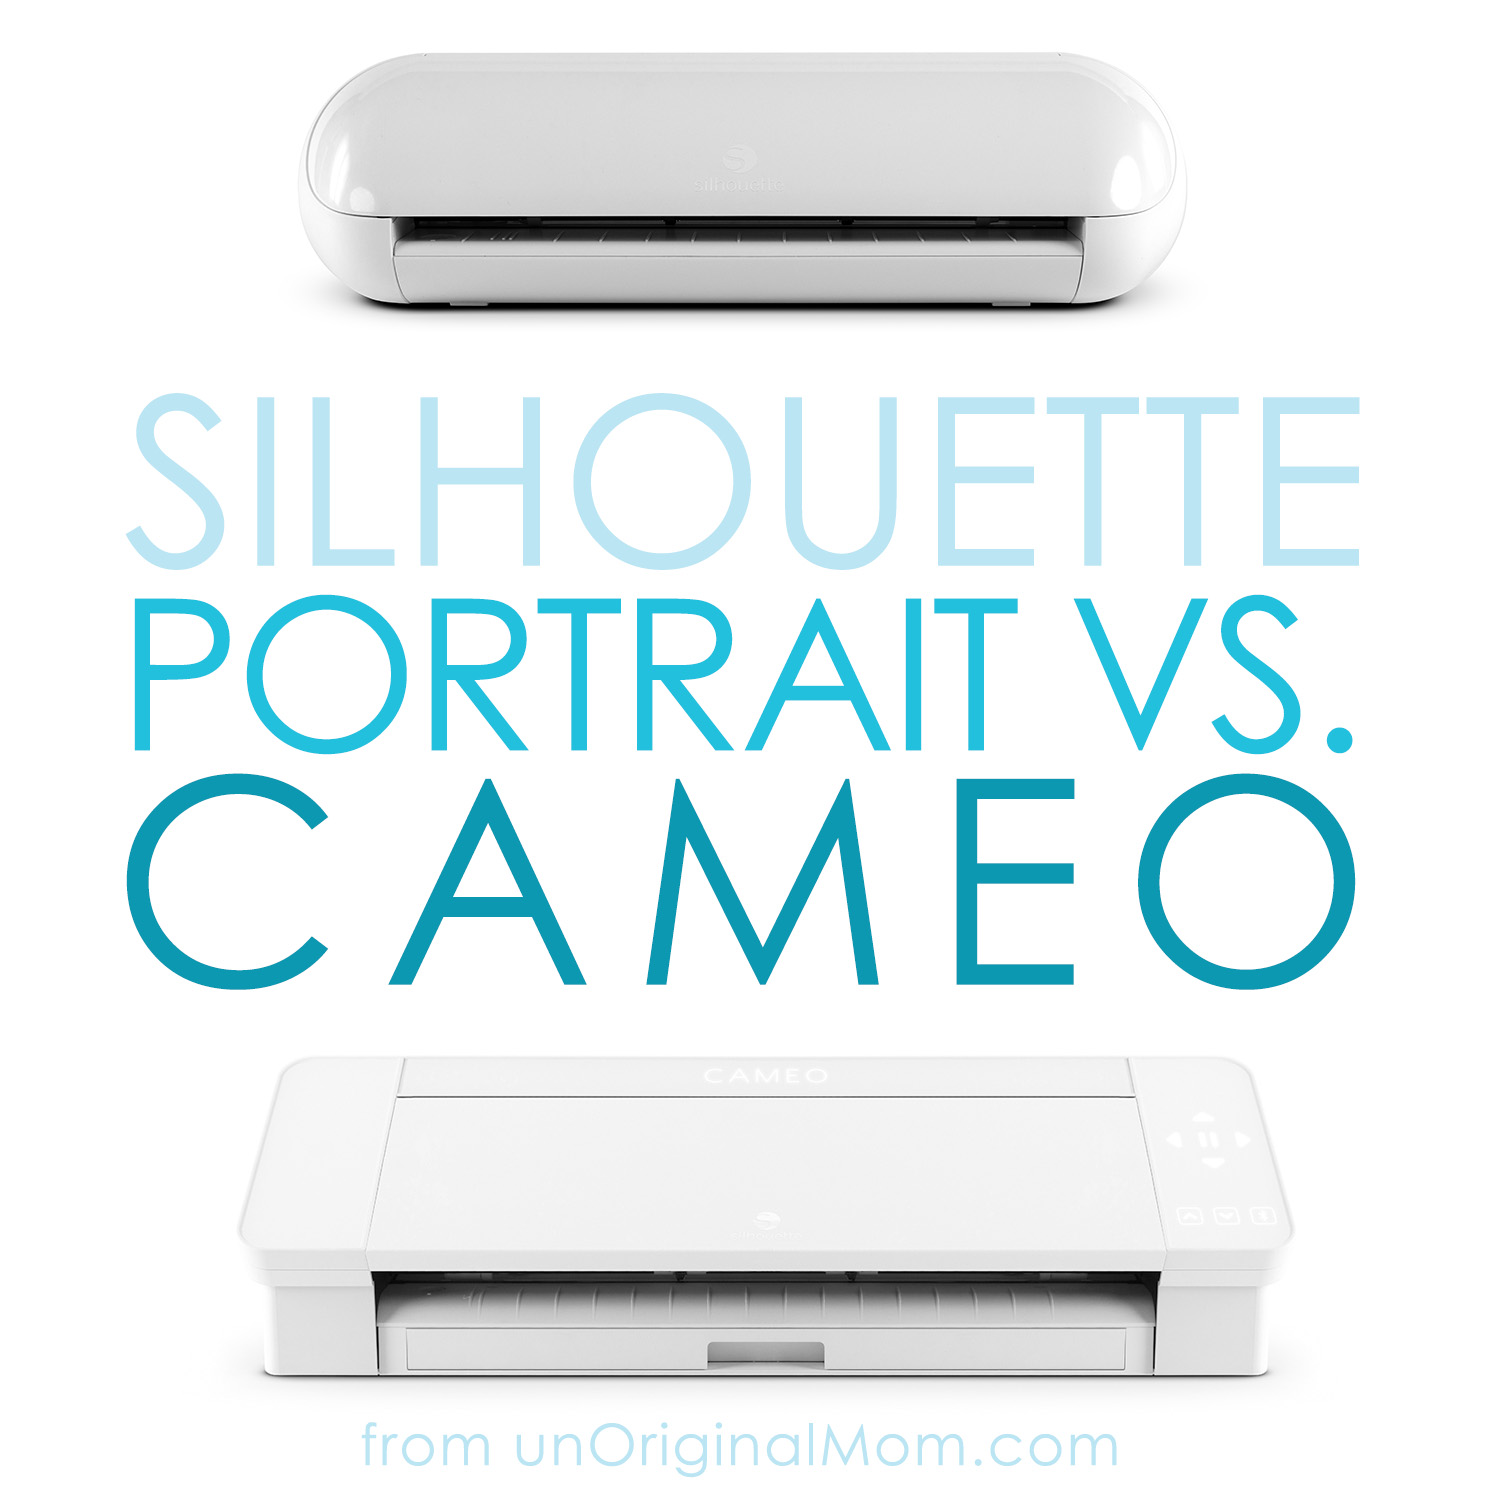 The New Silhouette Cameo 4 Plus IS HERE !